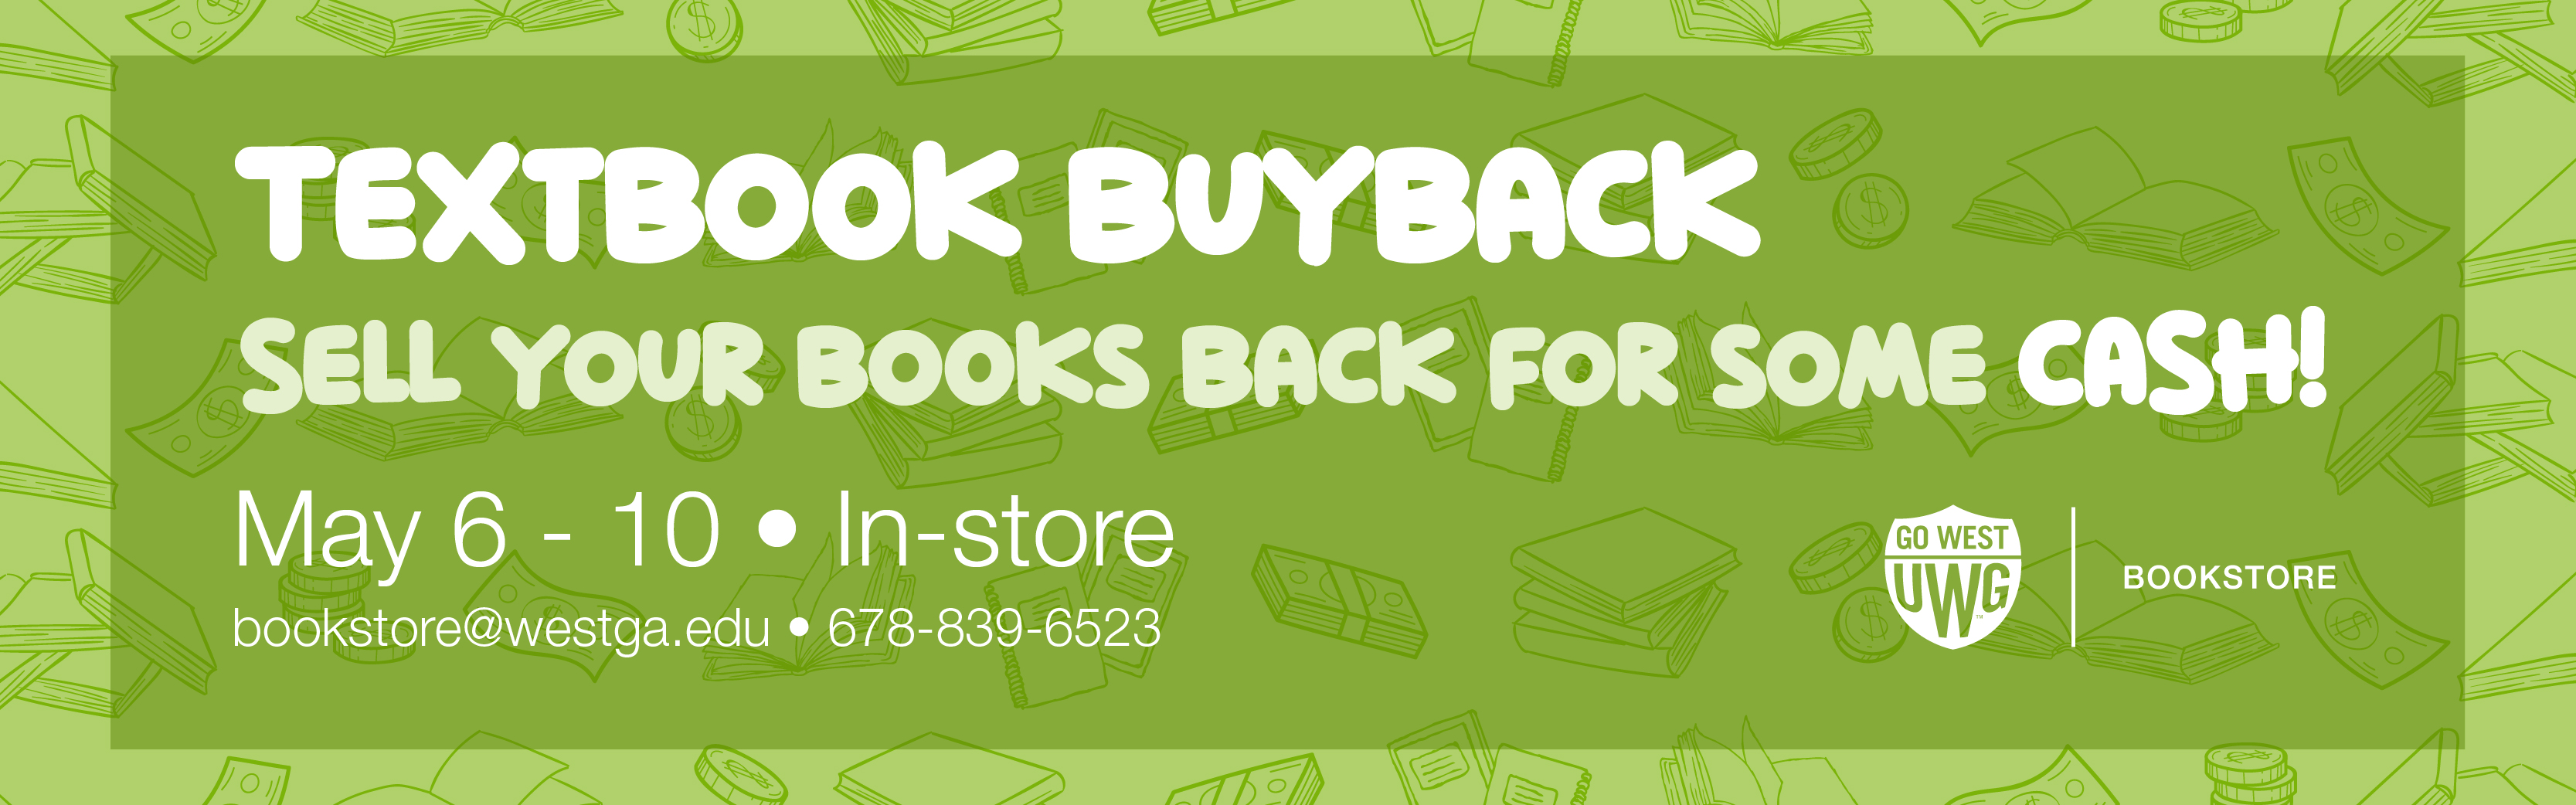 Textboook Buyback. Sell your books back for some cash! May 6th-10th. In-store.